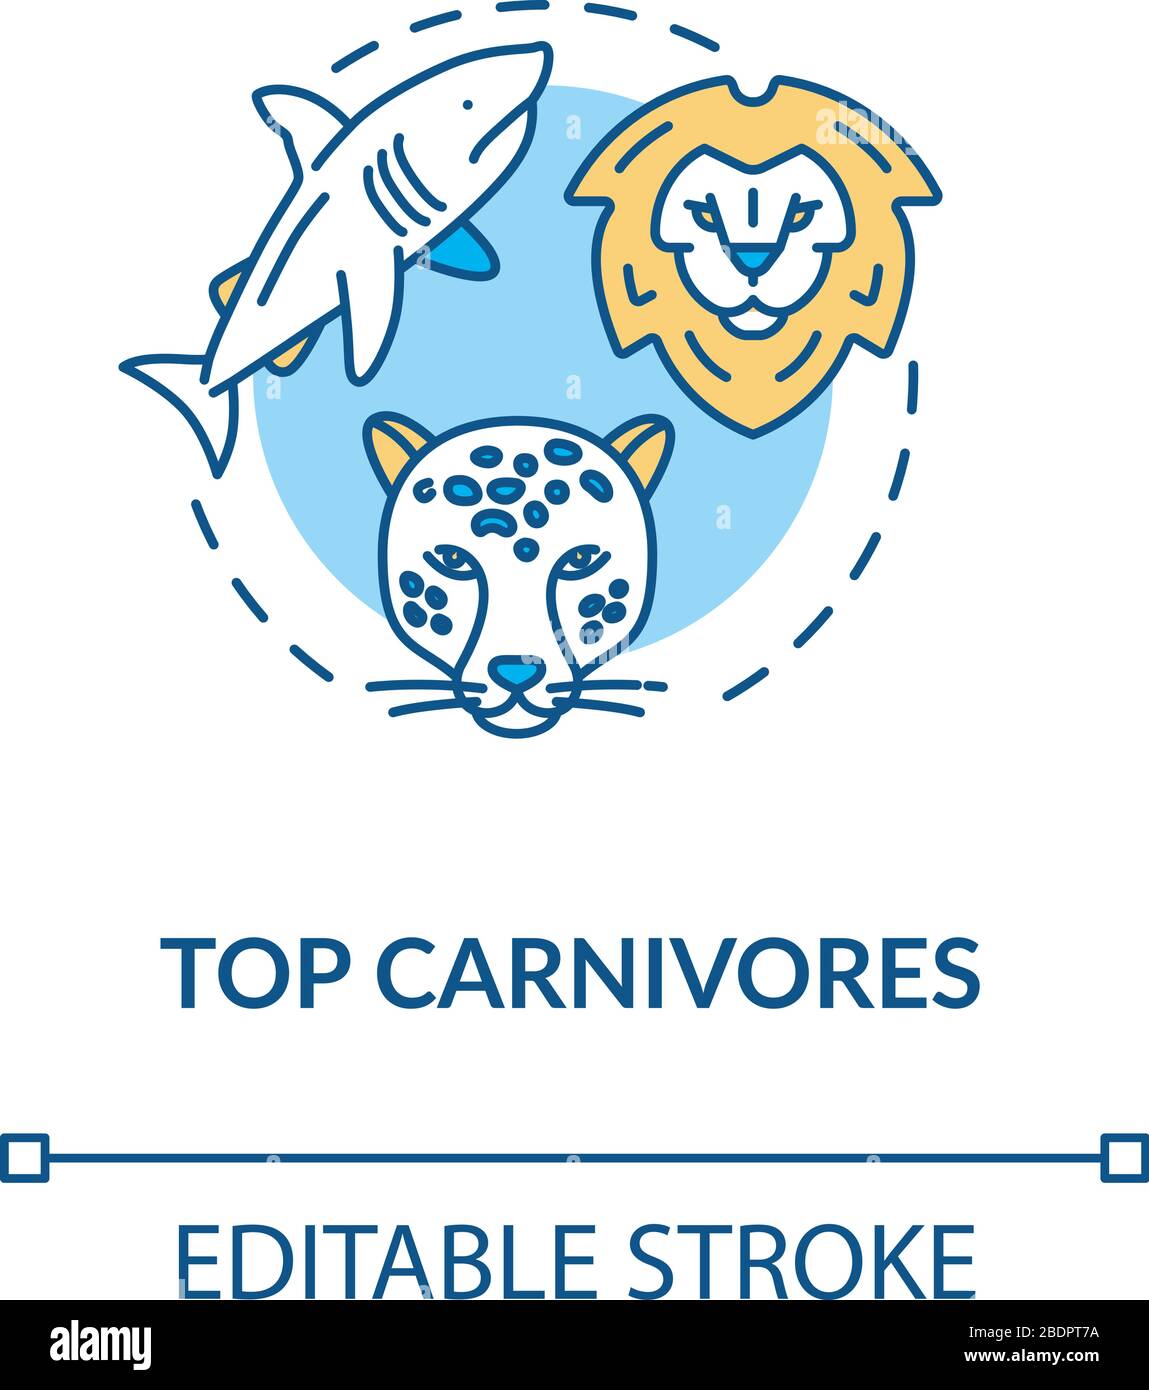 Top carnivores concept icon. Wild animals. Food chain apex predators. Marine and land ecosystems idea thin line illustration. Vector isolated outline Stock Vector